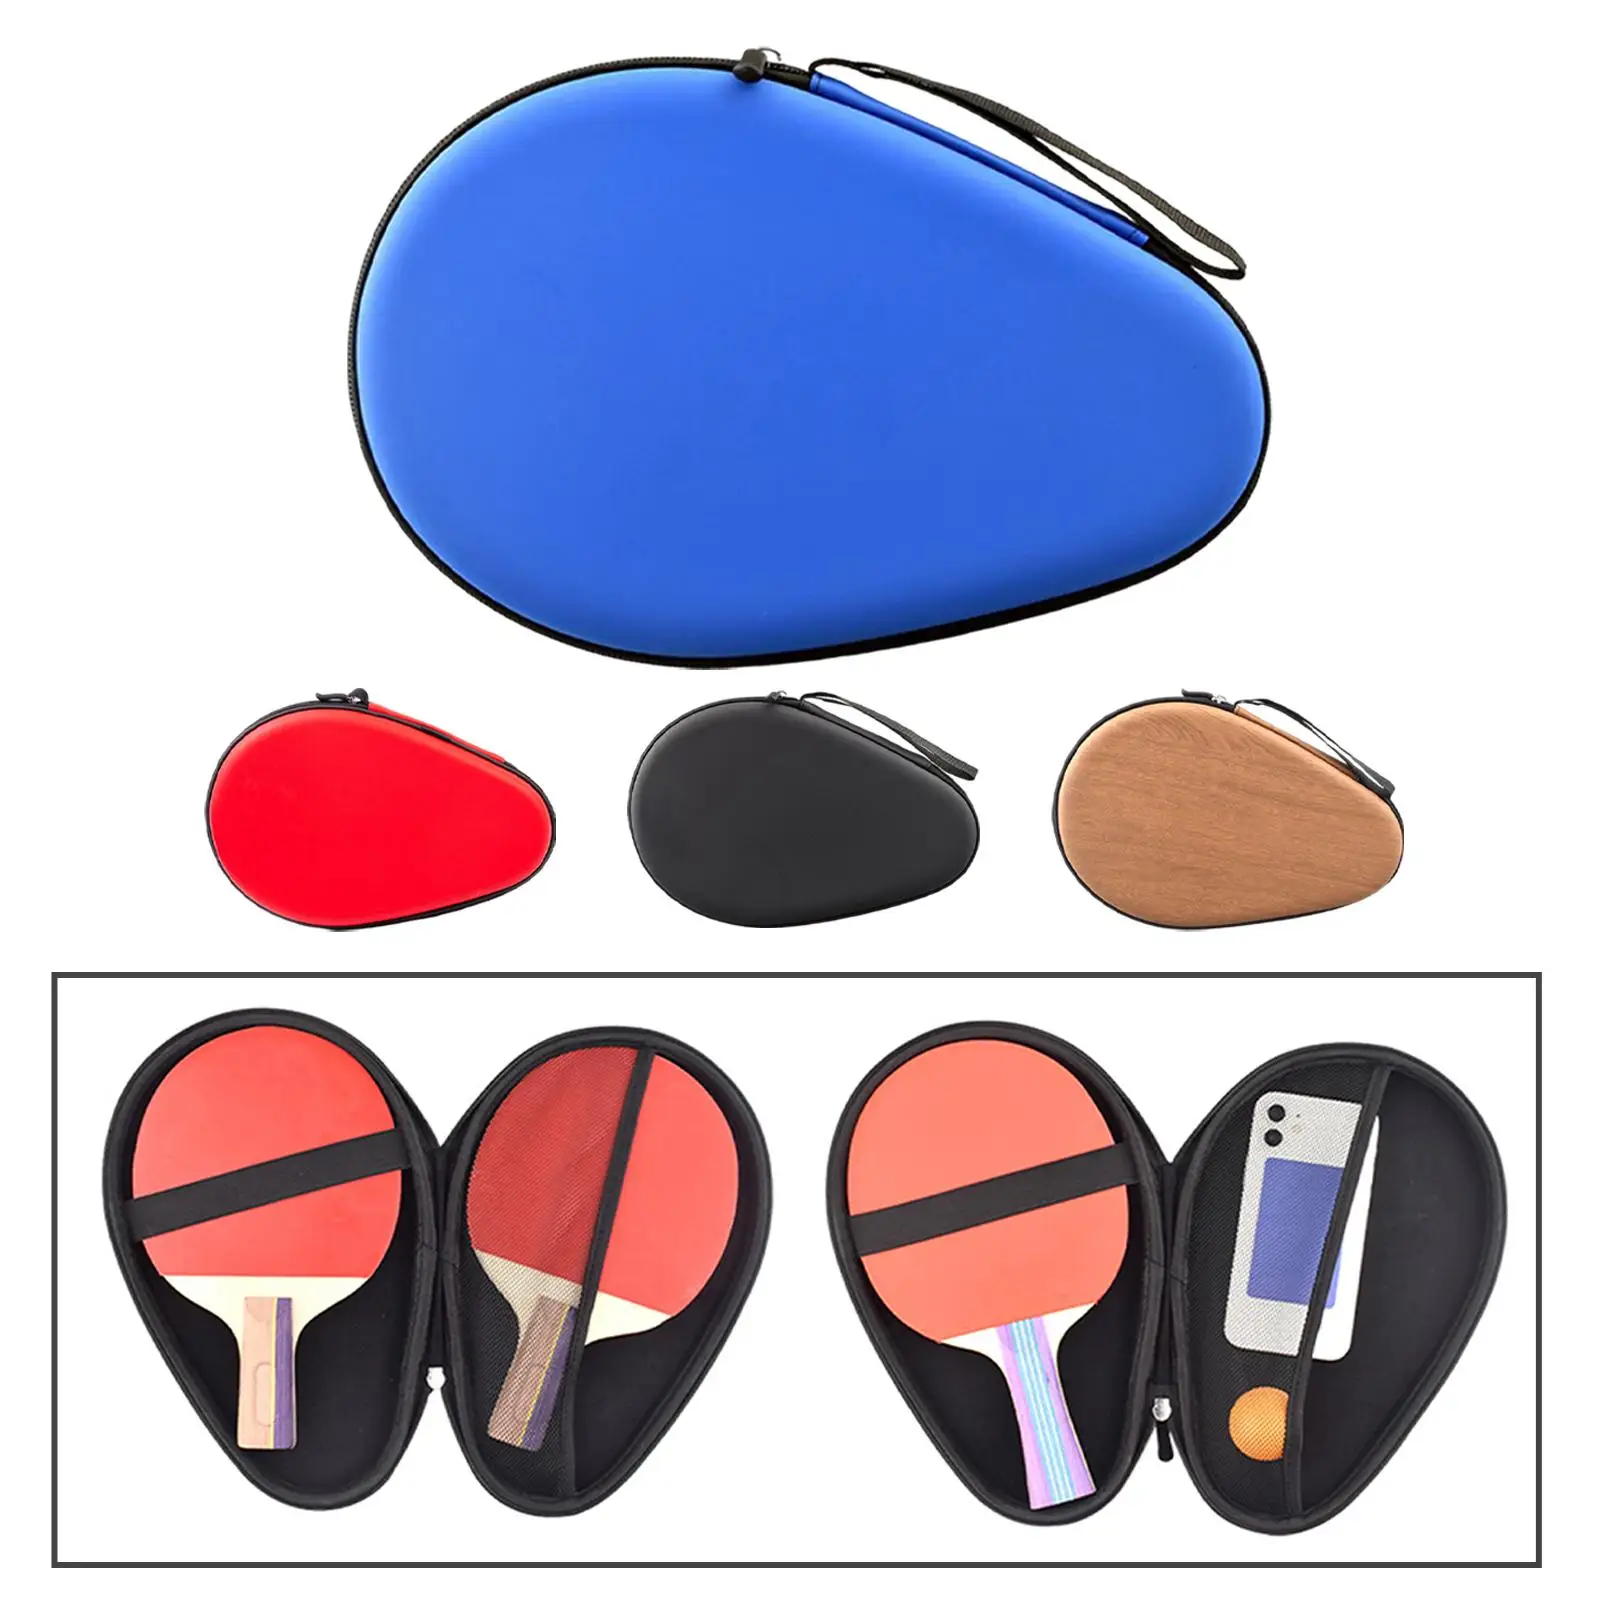 Multifunction Table Tennis Racket Bag with Zipper Durable Storage Case Waterproof Table Tennis Protector for Indoor Competition